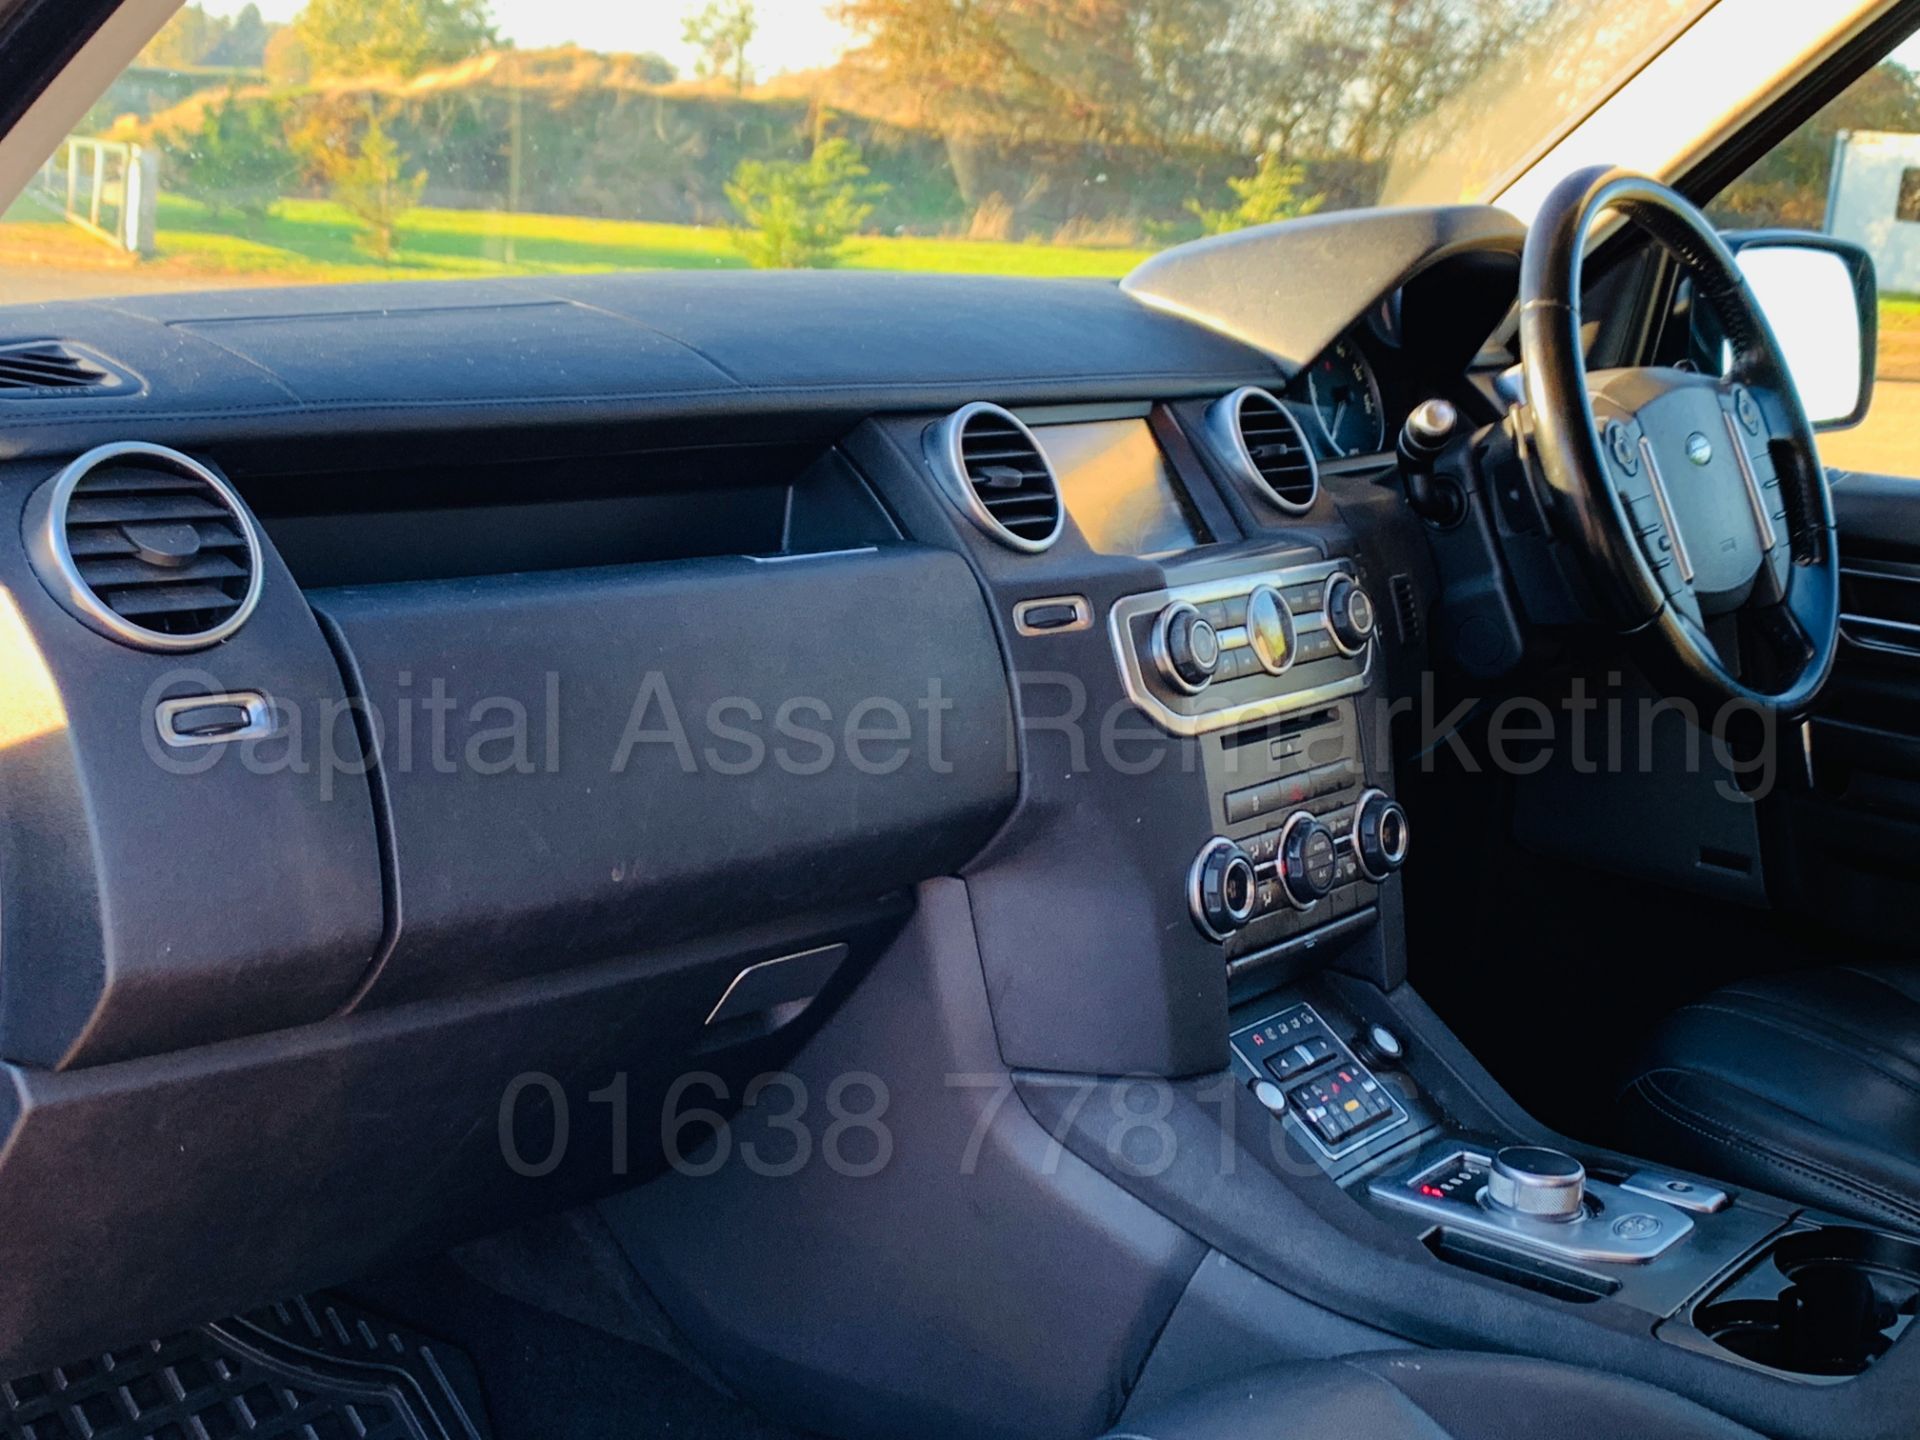 LAND ROVER DISCOVERY 4 **COMMERCIAL** (2014 MODEL) '3.0 SDV6 - 255 BHP - 8 SPEED AUTO' *HUGE SPEC* - Bild 22 aus 47